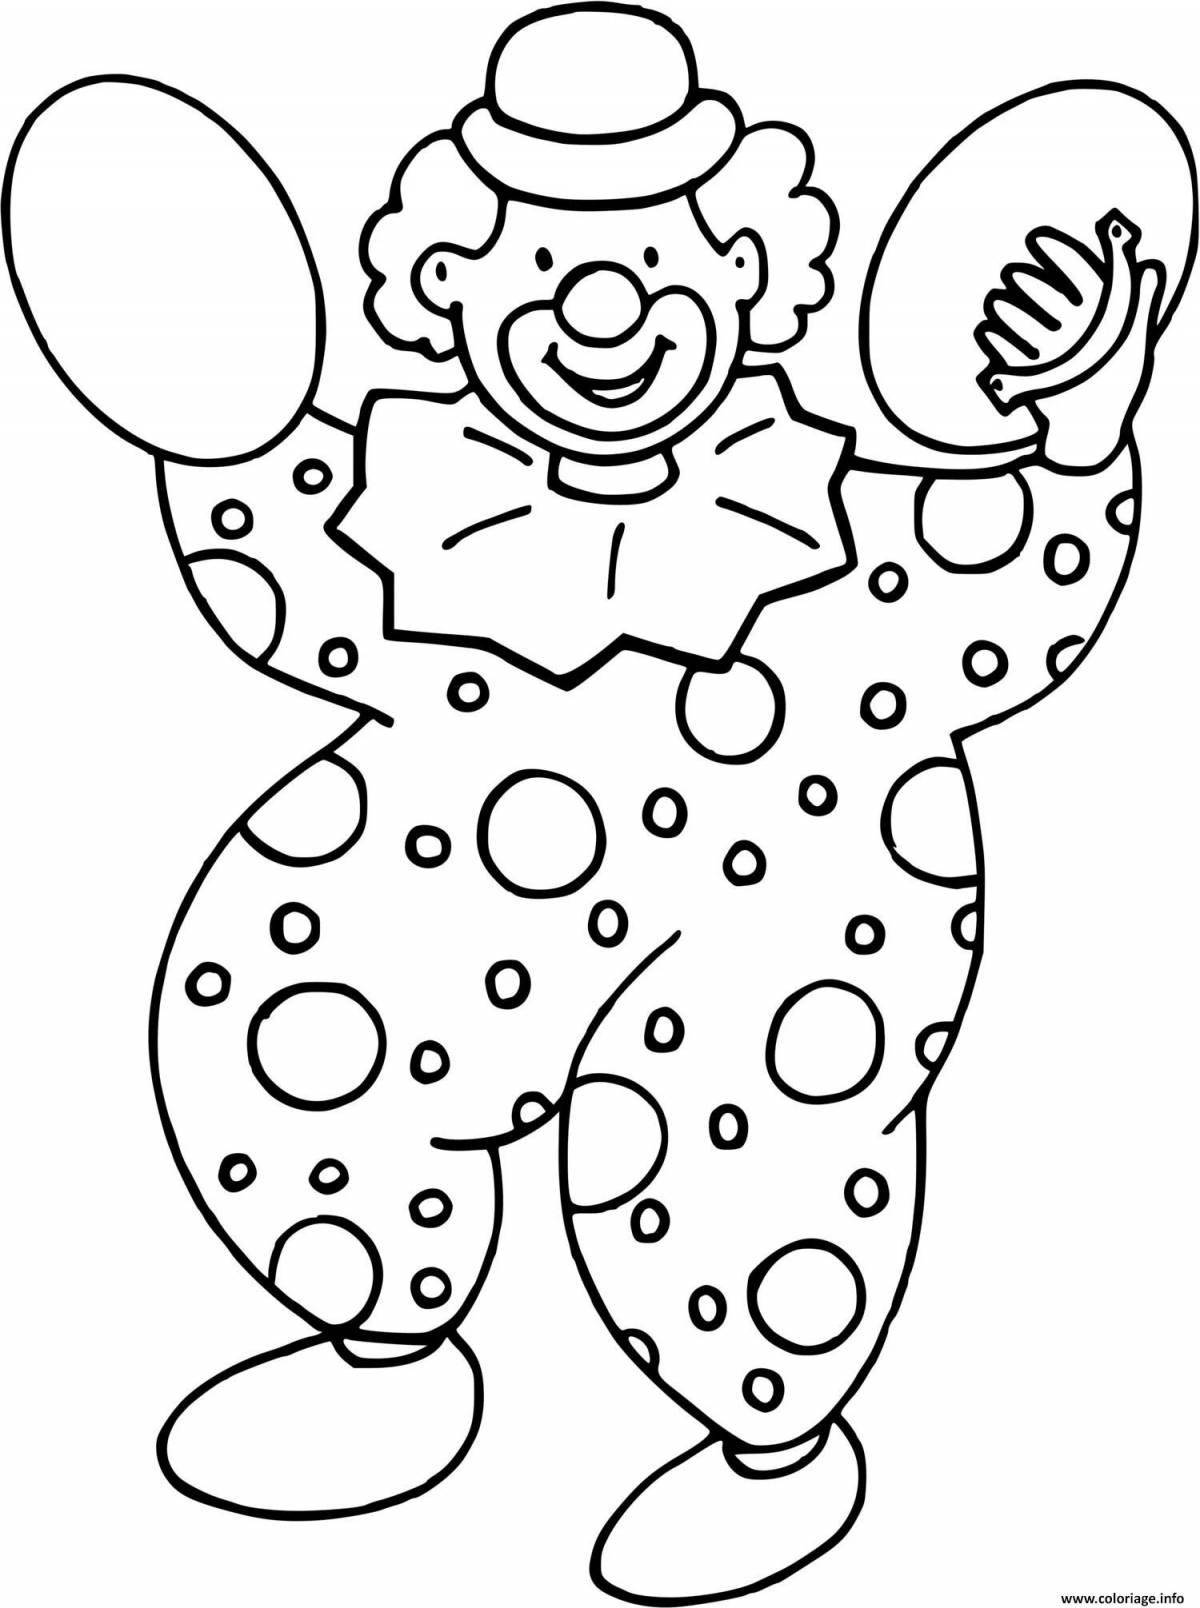 Holiday clown coloring book for preschoolers